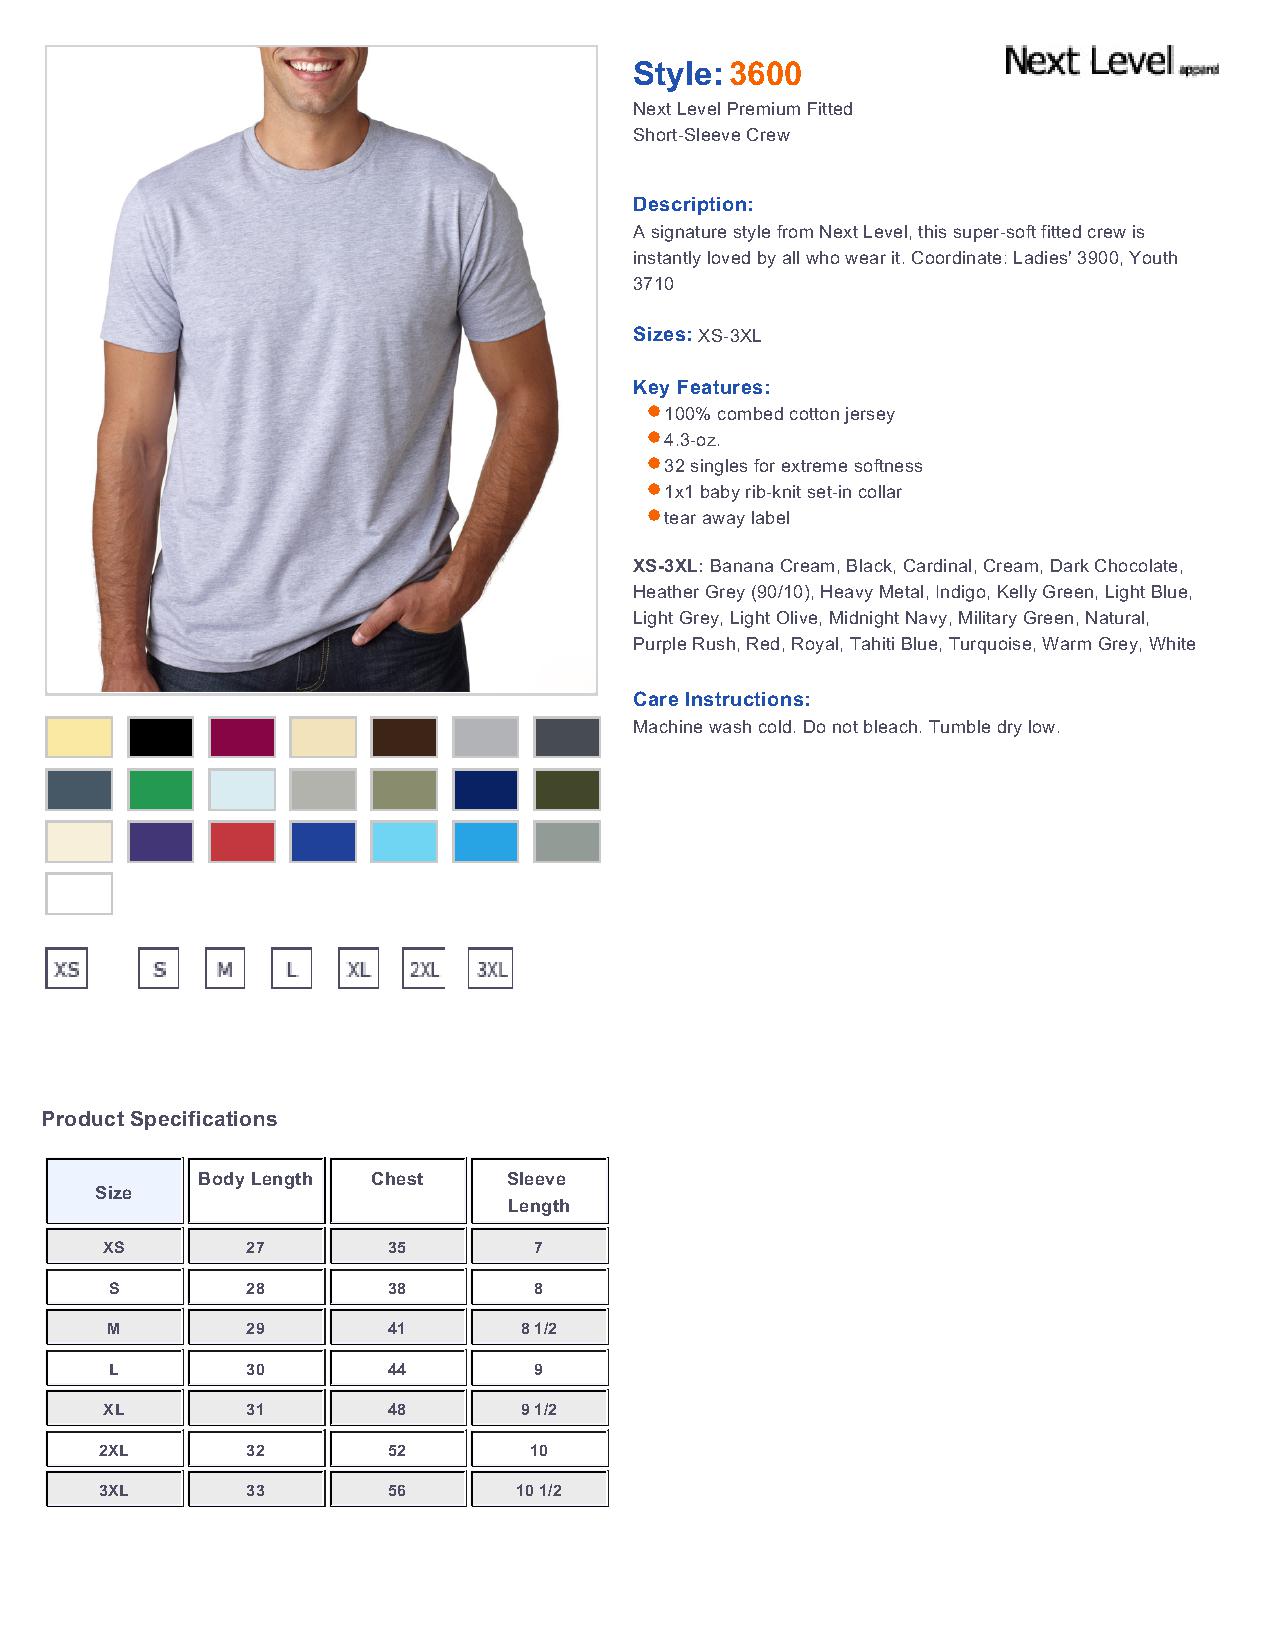 Next Level 3600 - Men's Fitted Short-Sleeve Crew $4.17 - T Shirts